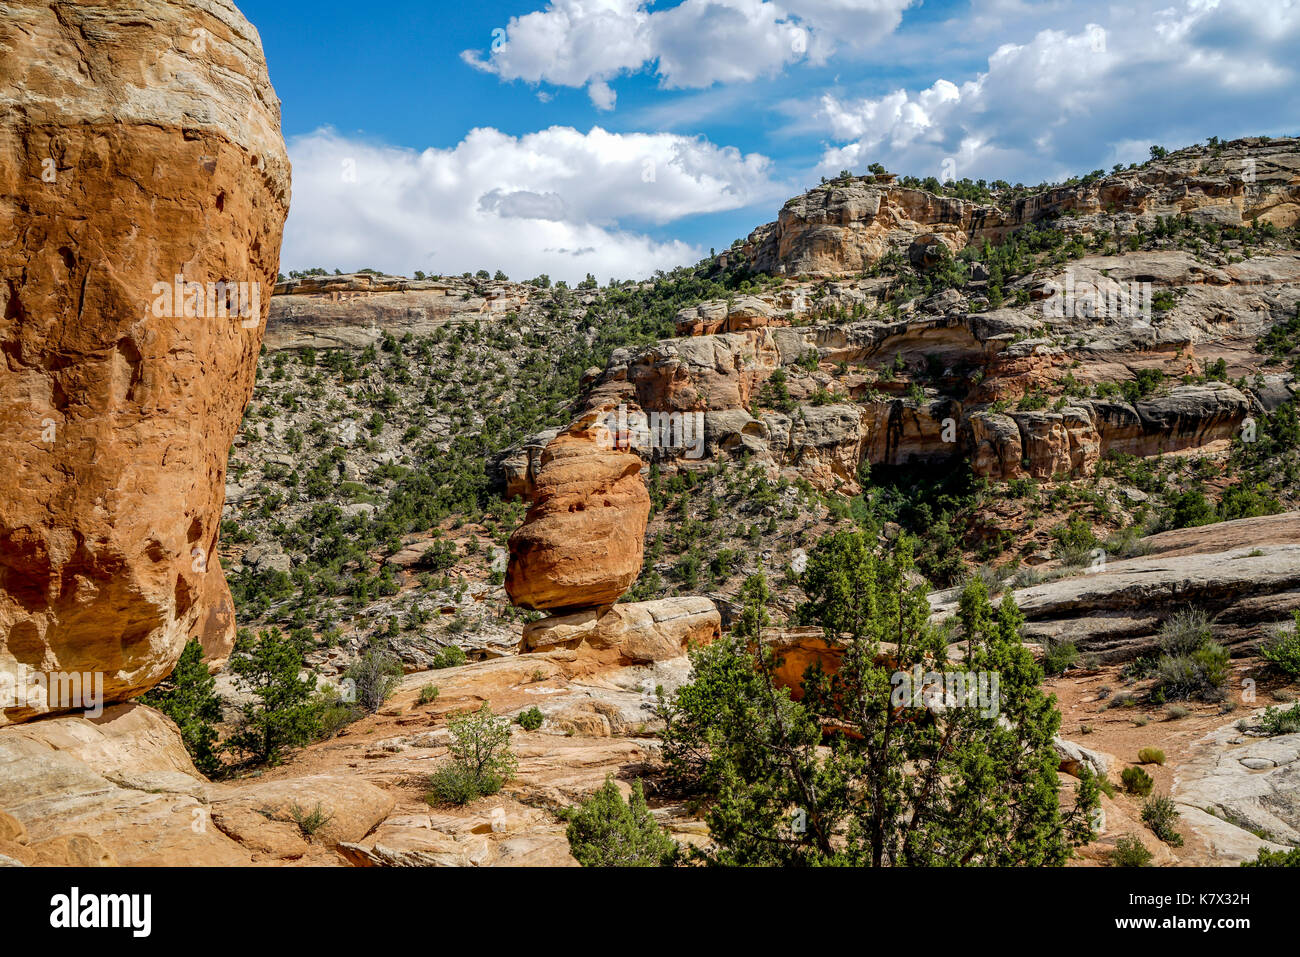 A beautiful day for a hike through Monument National Park in southwest Colorado. Stock Photo